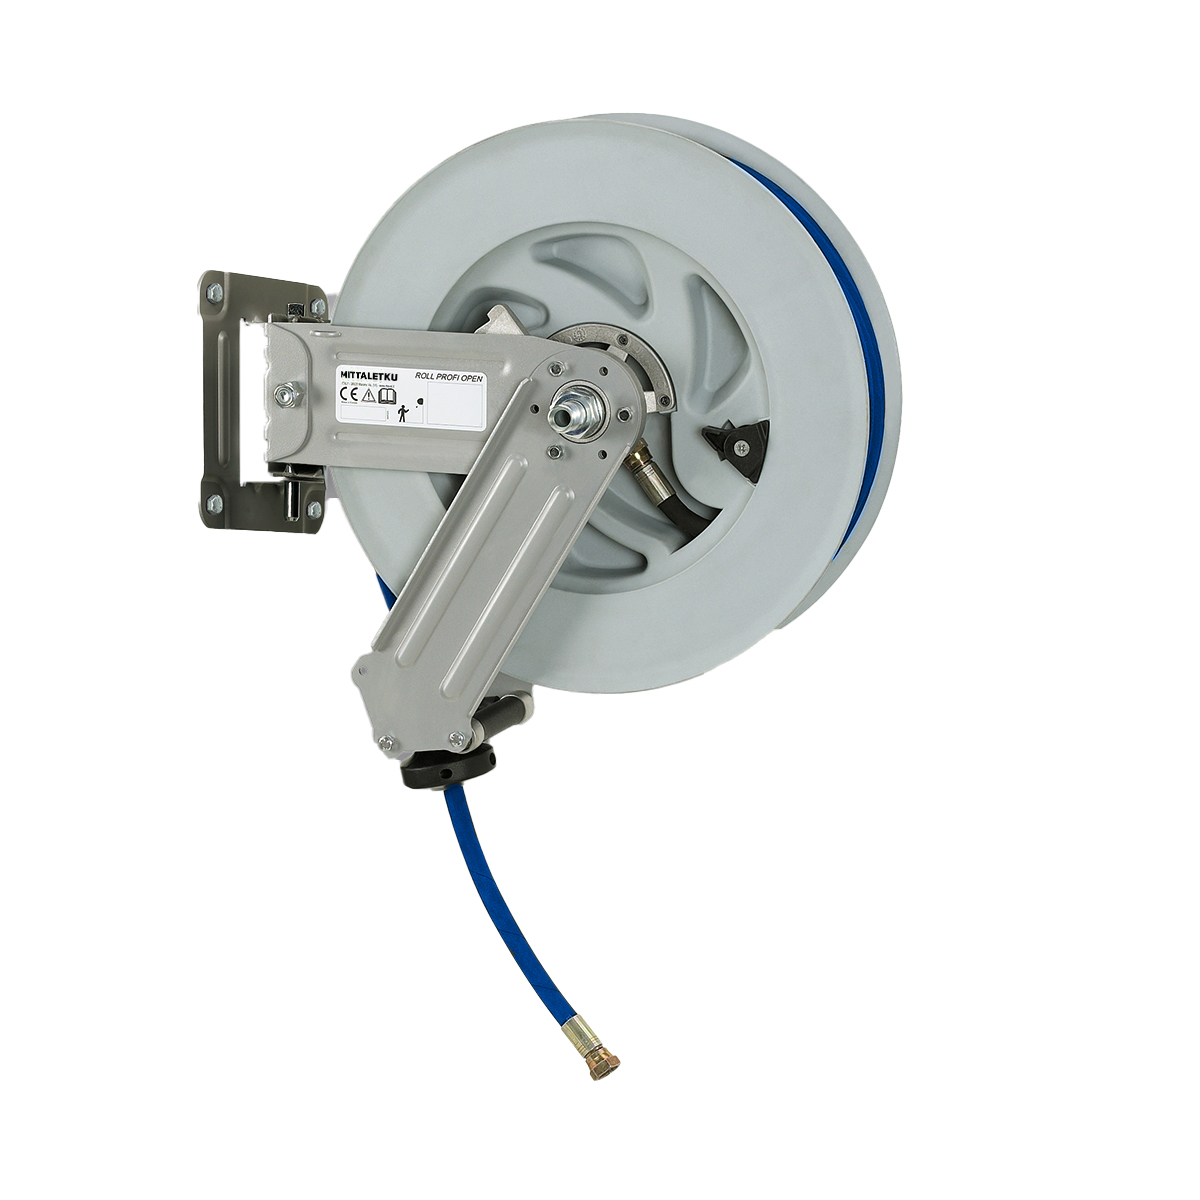 Compressed air hose reel with rubber hose